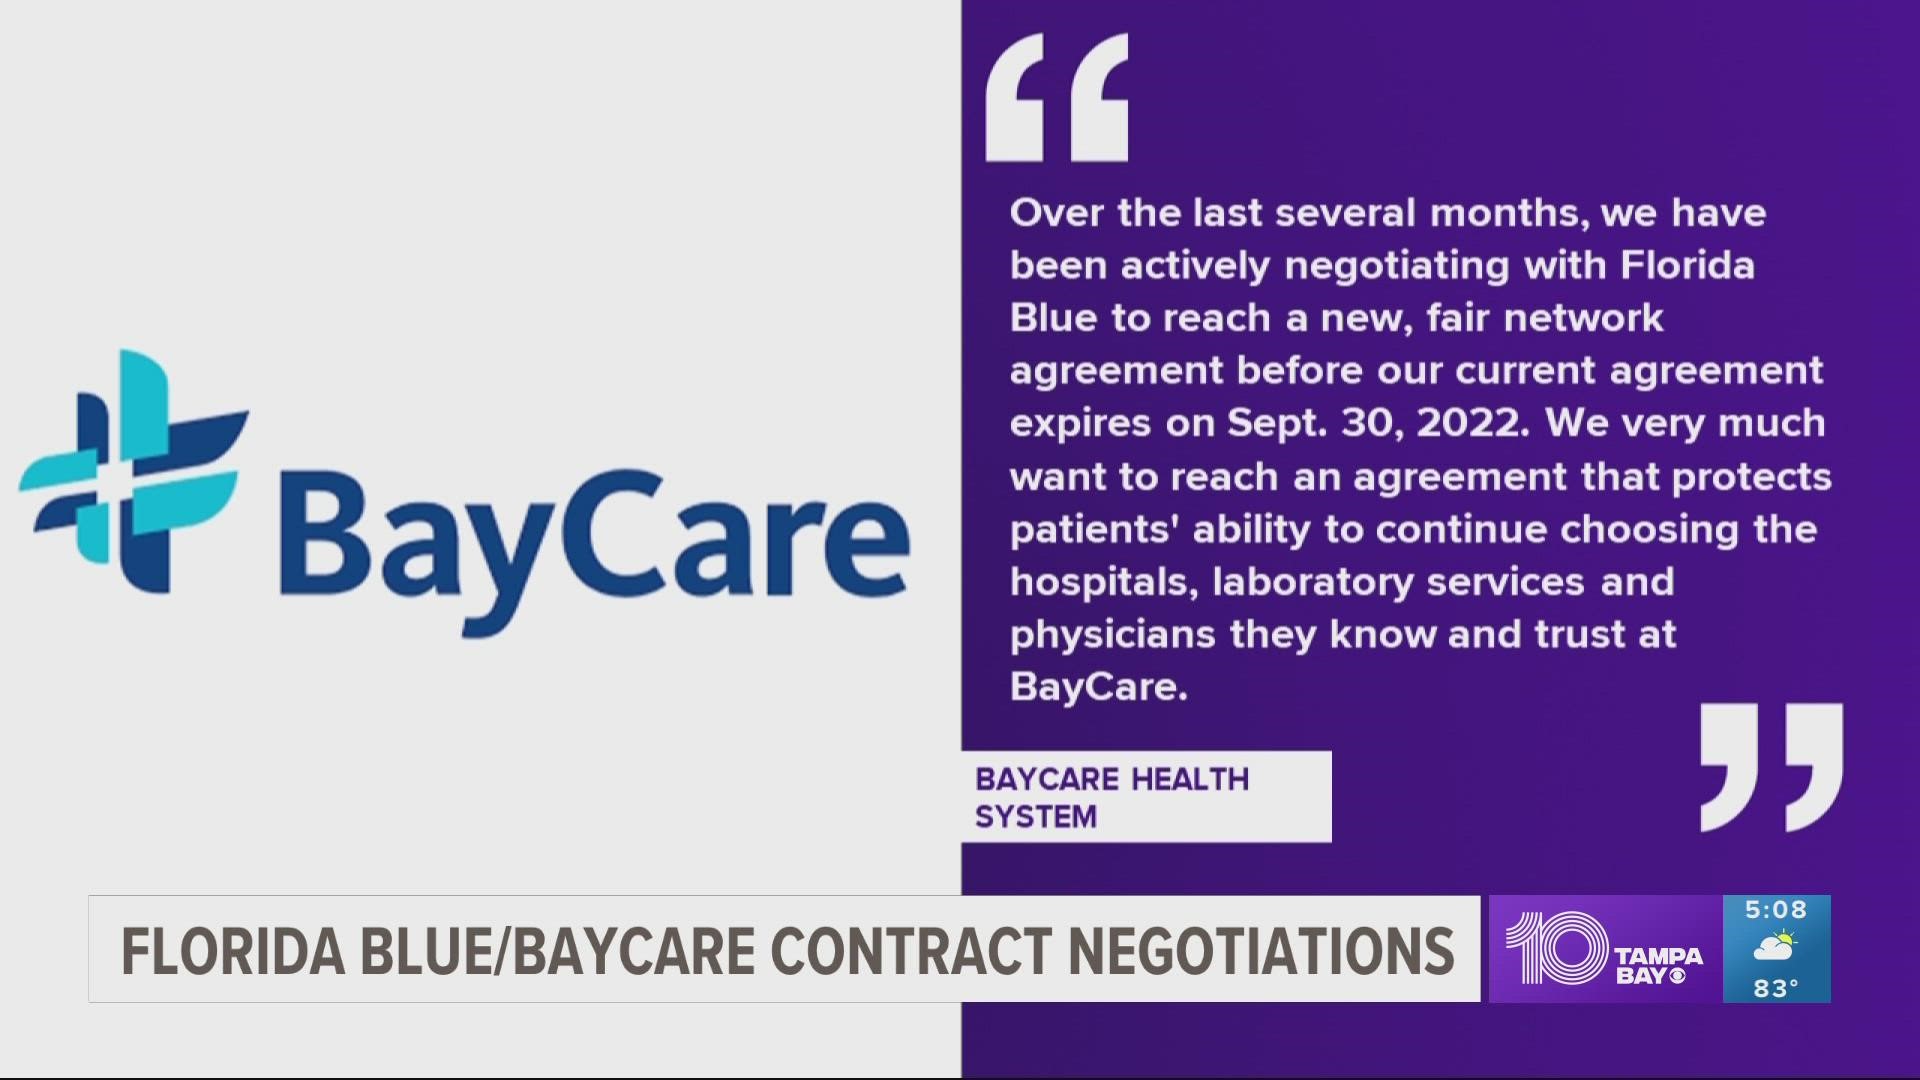 BayCare leaders say over the last several months, they have been negotiating with Florida Blue to reach a new, fair network agreement.